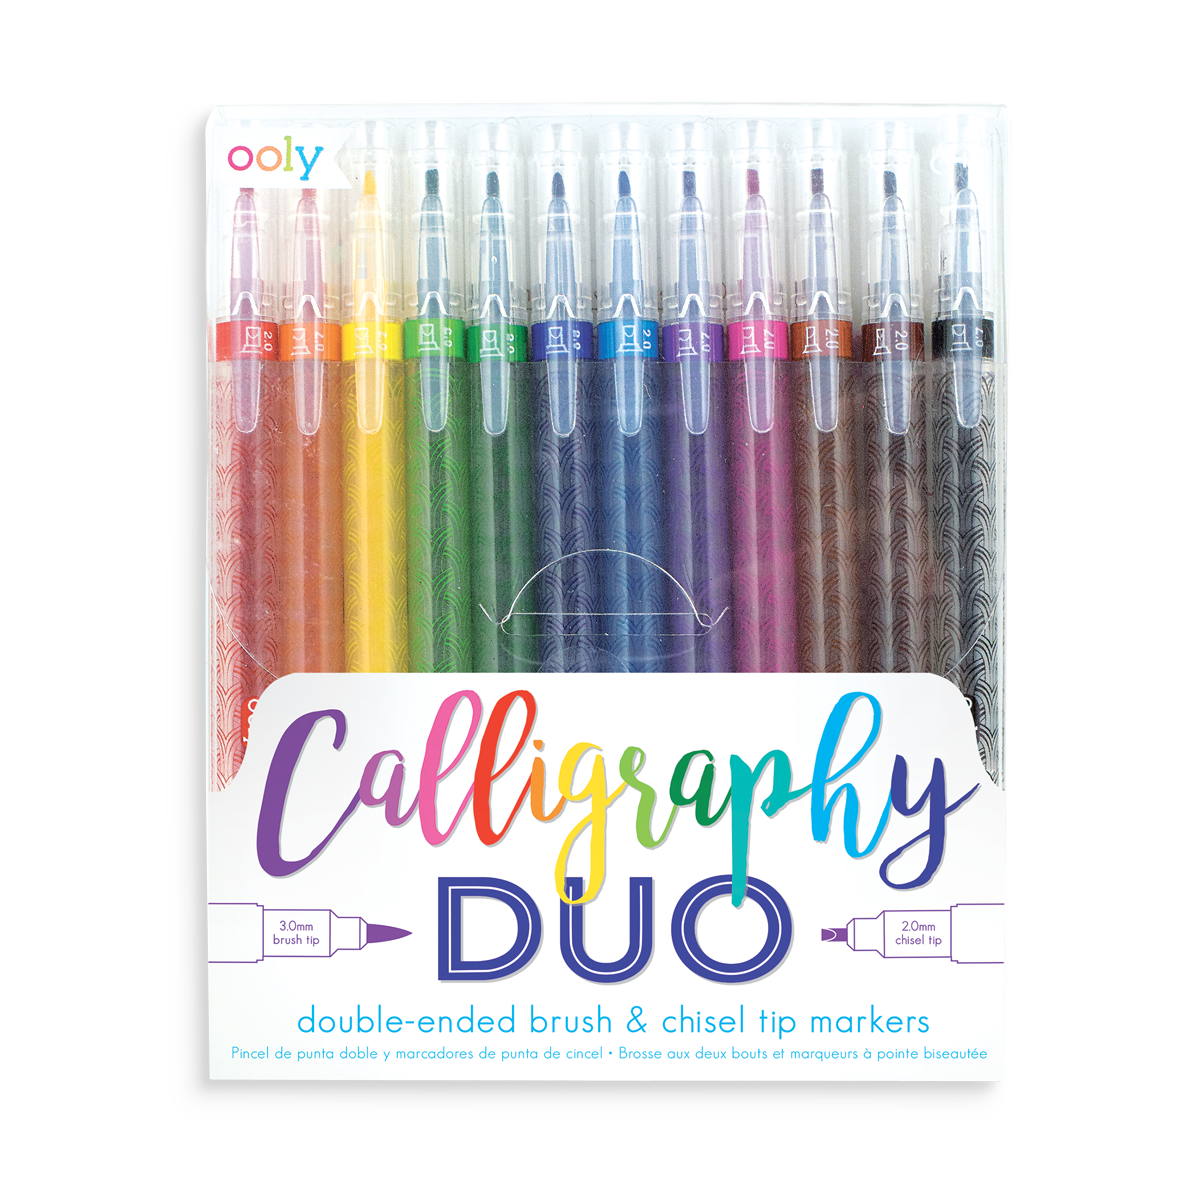 Set of 12 Calligraphy Duo Markers for chisel tip calligraphy and brush lettering